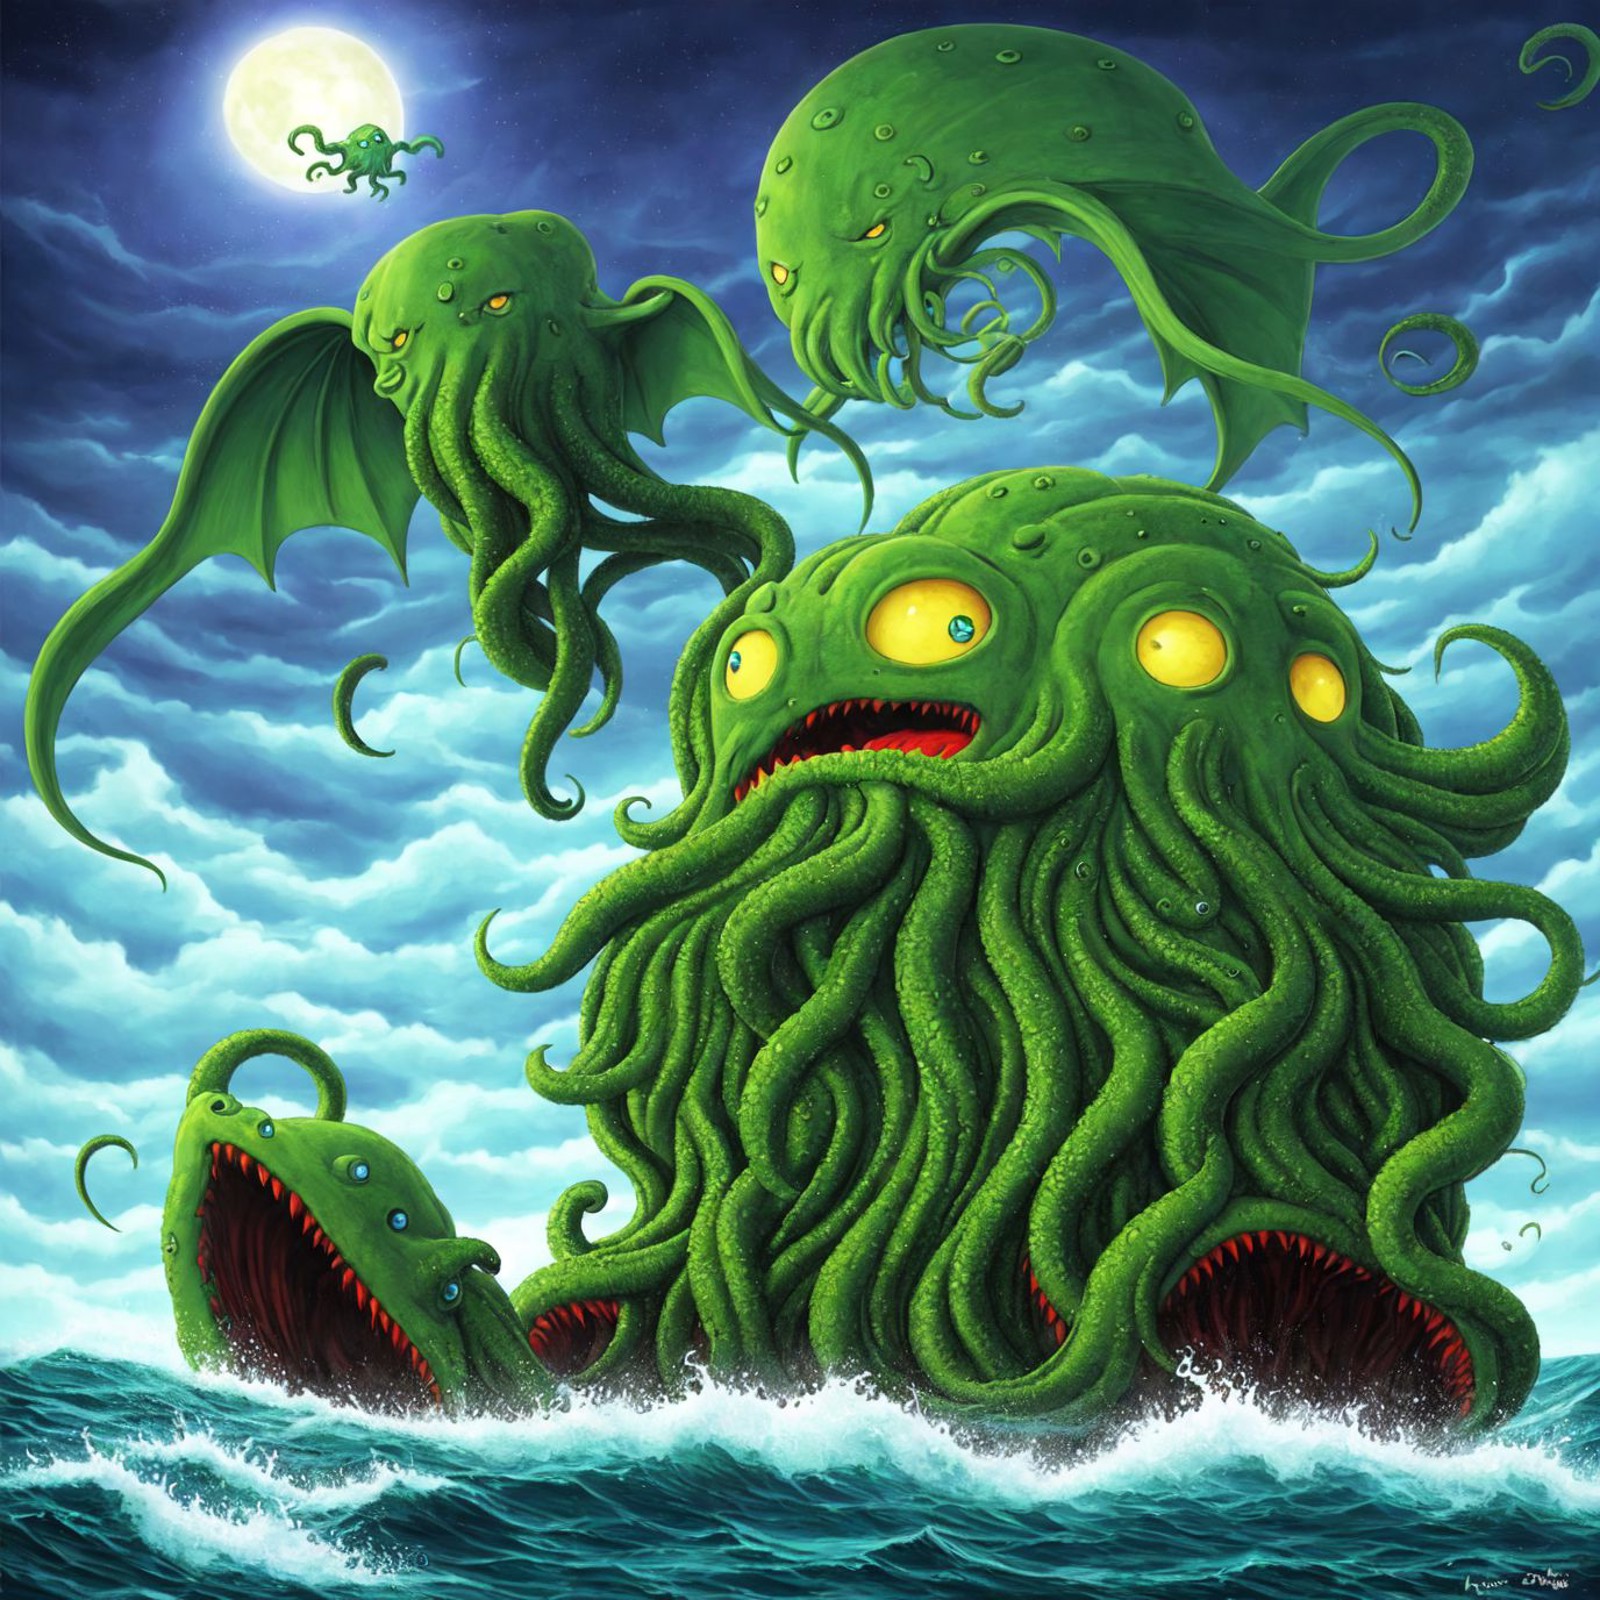 00033-20230531093103-560-Cthulhu rising from the sea in a great storm, based on H.P Lovecraft stories, Naoto Hattori.jpg